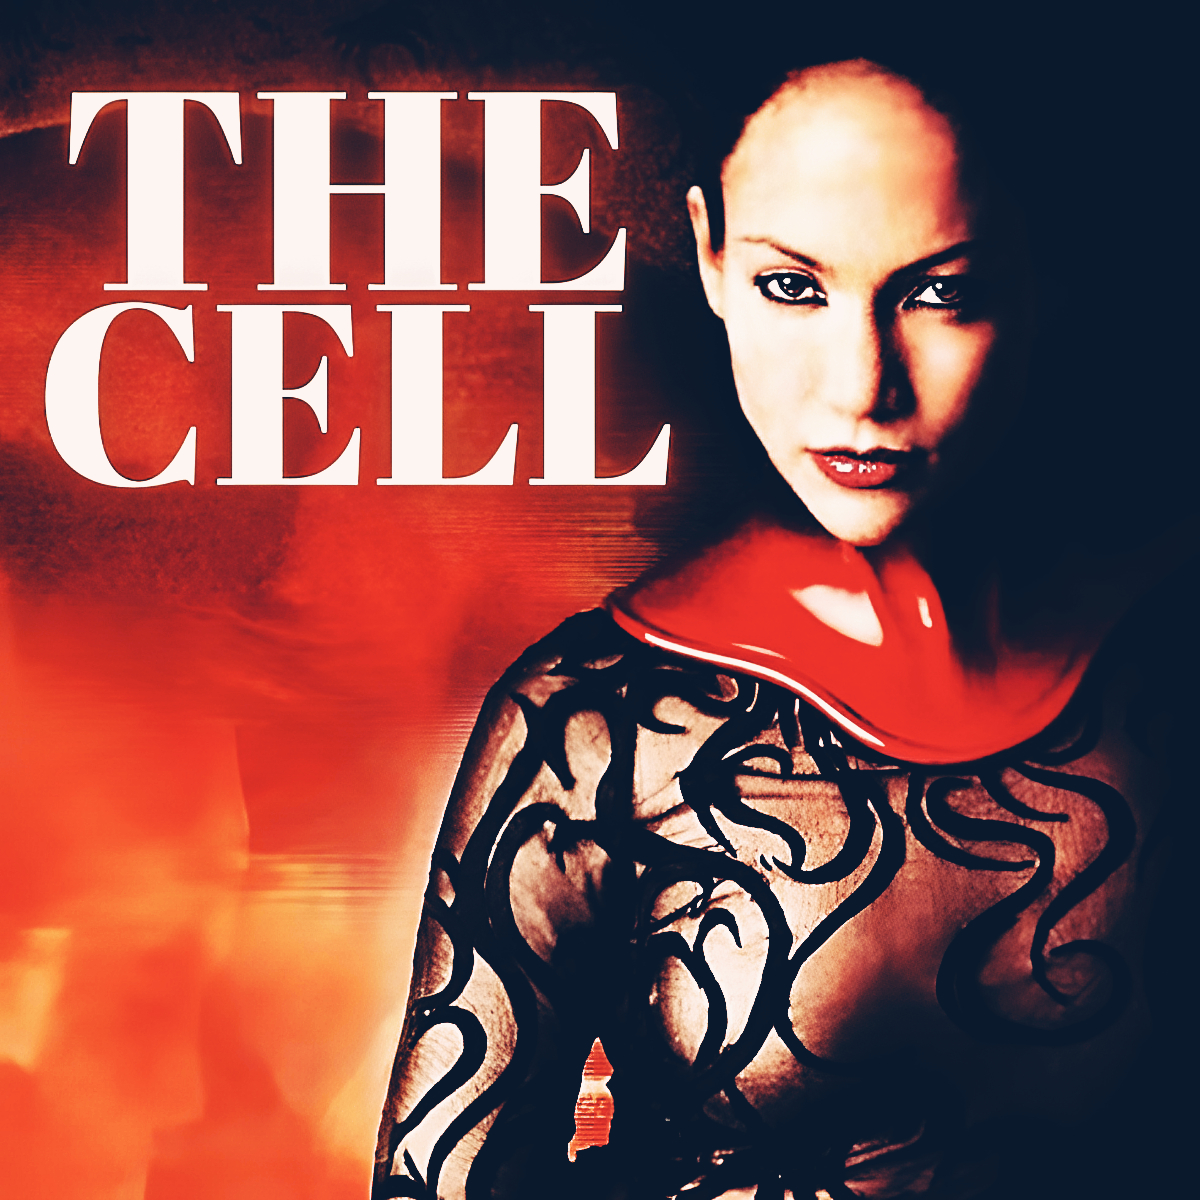 The Cell - A Dirty Mind Inside A Visionary Abyss

#MOVIES #AmazonPrime #TarsemSingh #JenniferLopez #VincentOnofrio #VinceVaughn

READ MORE ON FABIOEMME.IT

fabioemme.it/2022/10/27/the…